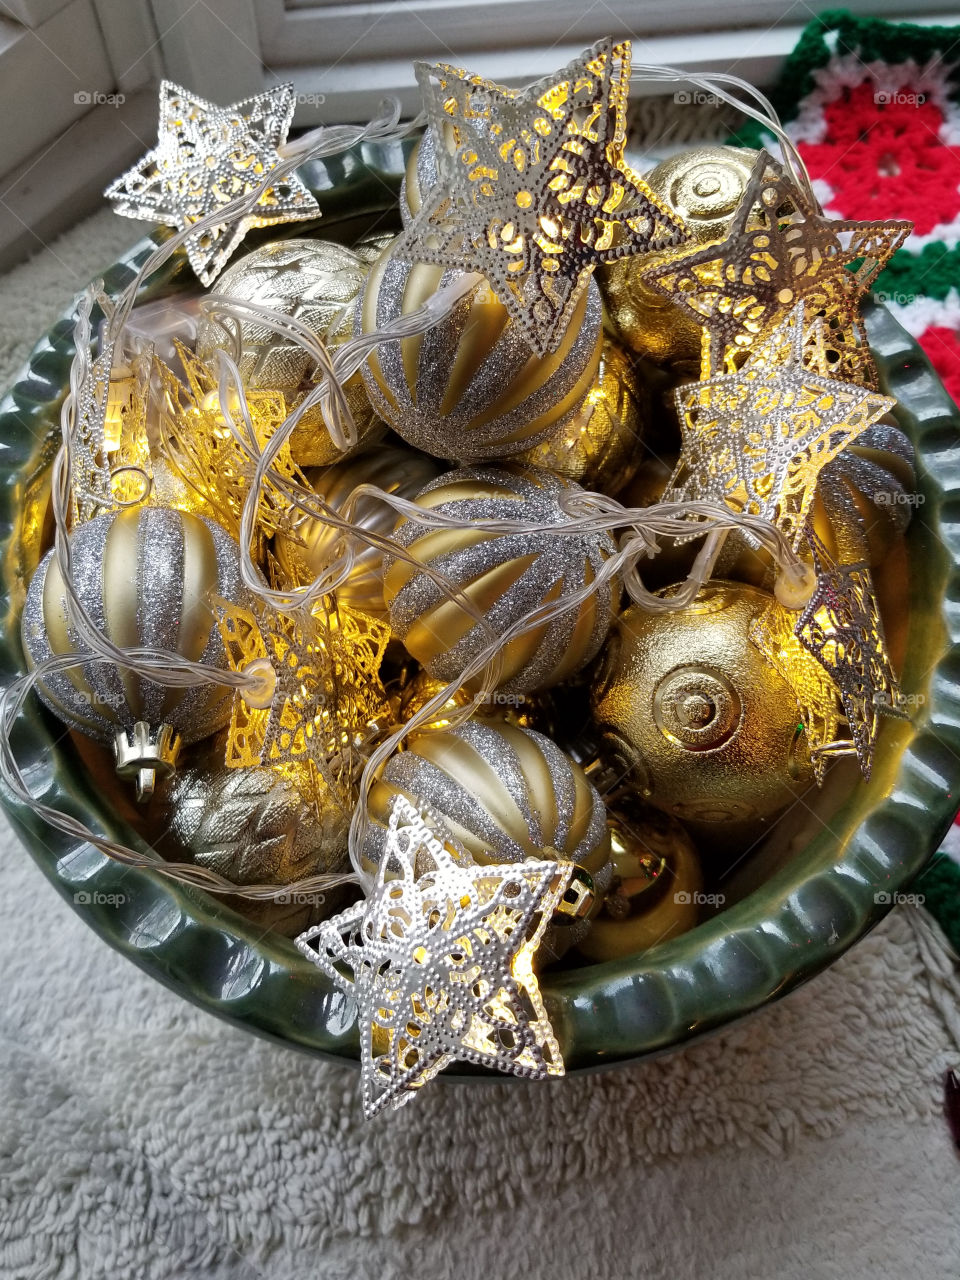 A bowl of festive Christmas ornaments and lights decorating a countertop.